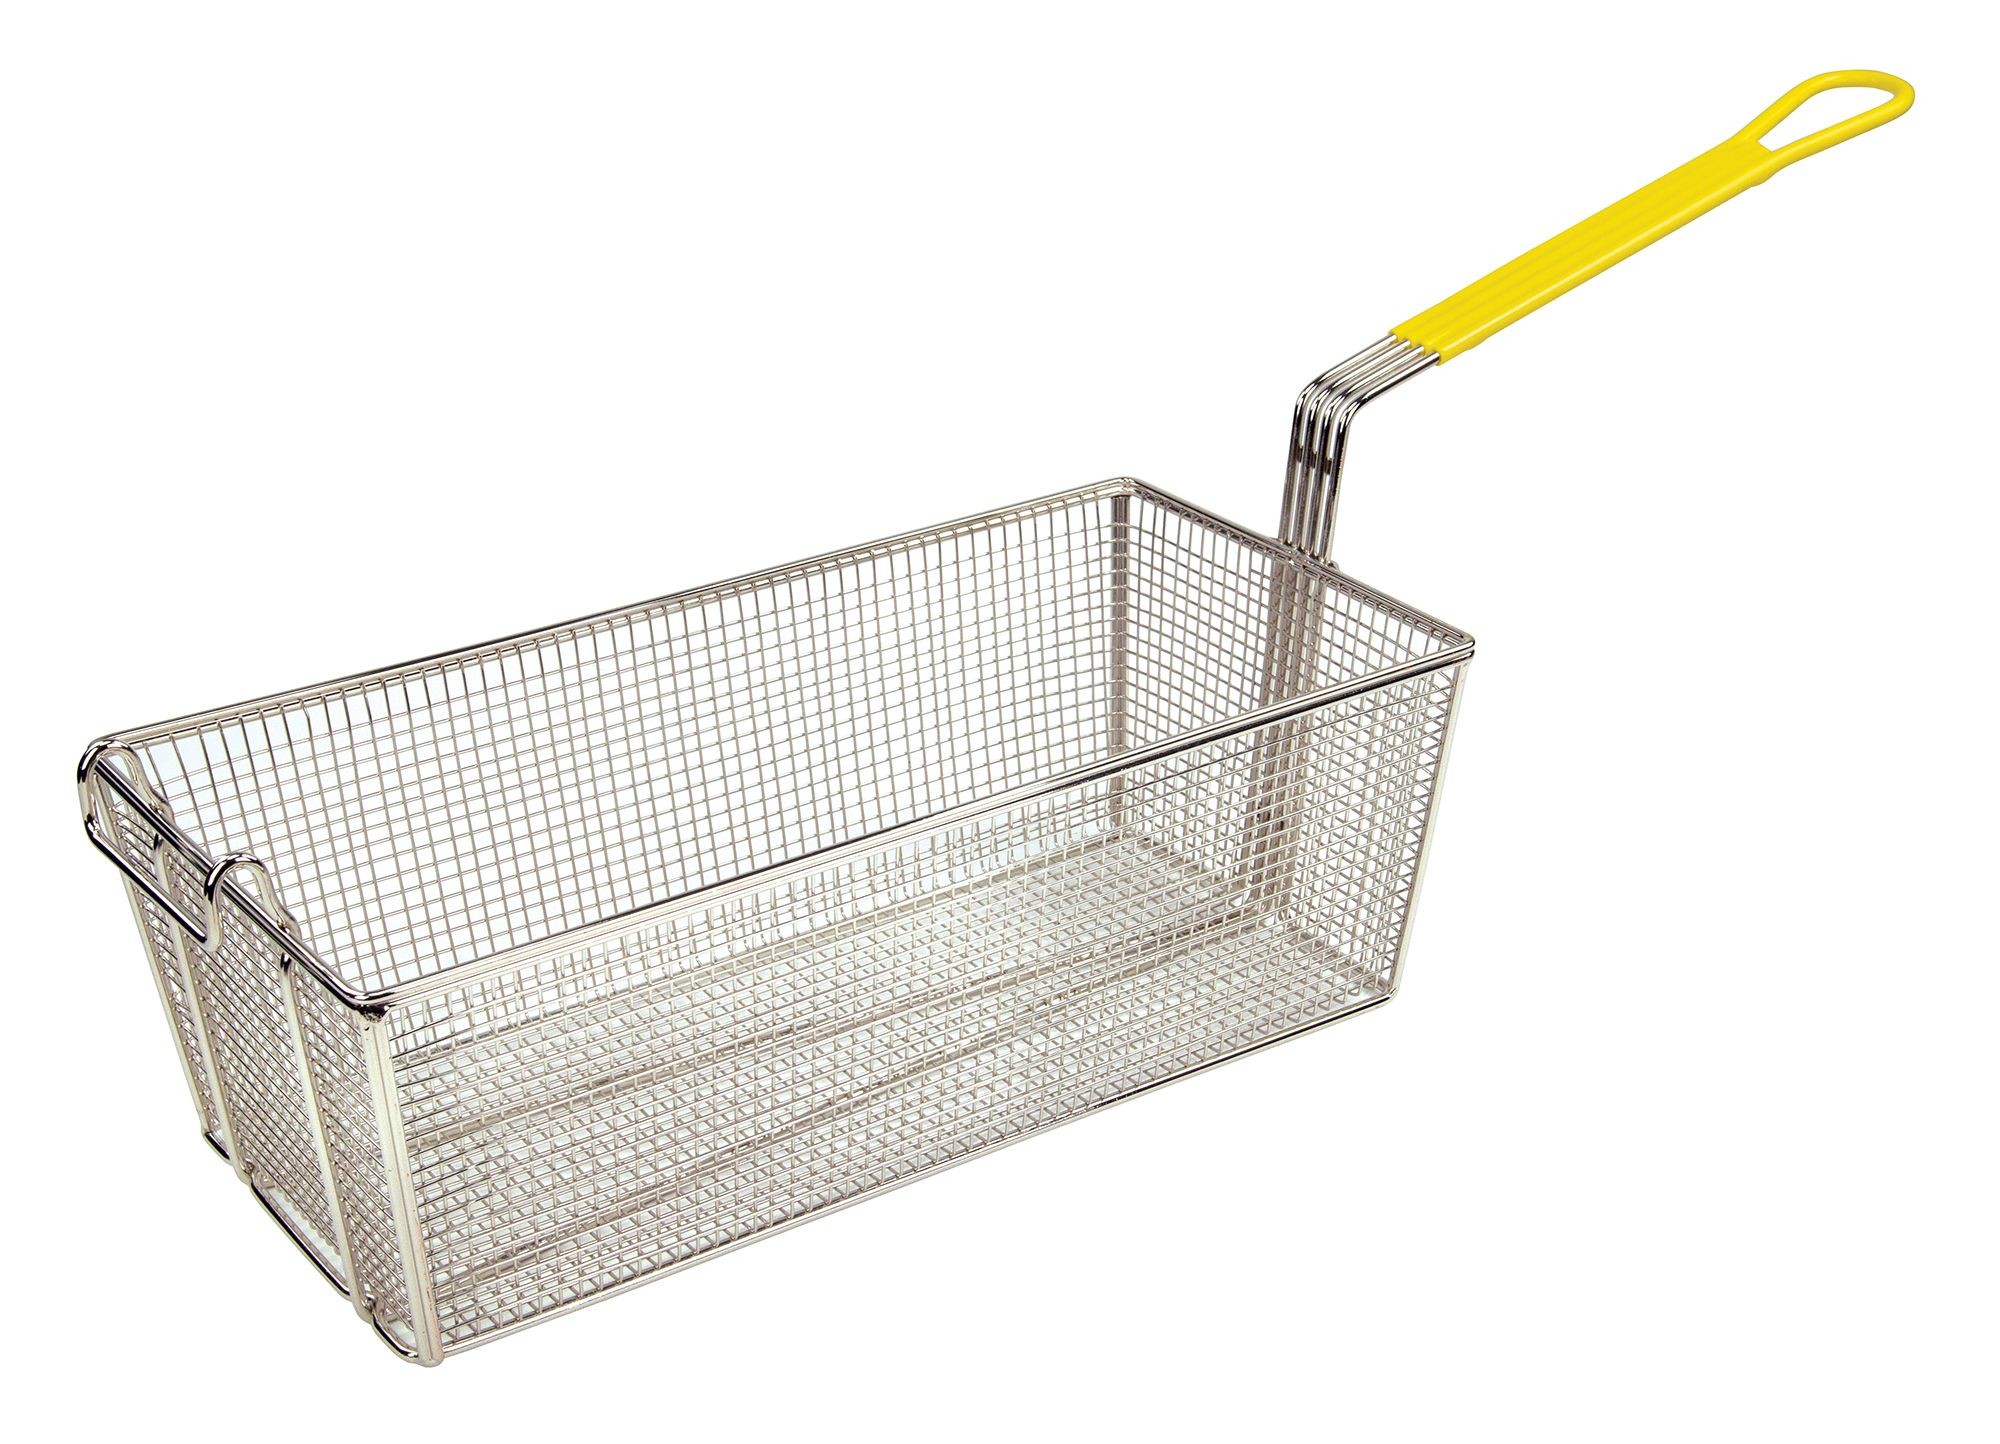 Winco FB-40 Fry Basket with Yellow Plastic Handle 17" x 8 1/4" x 6"